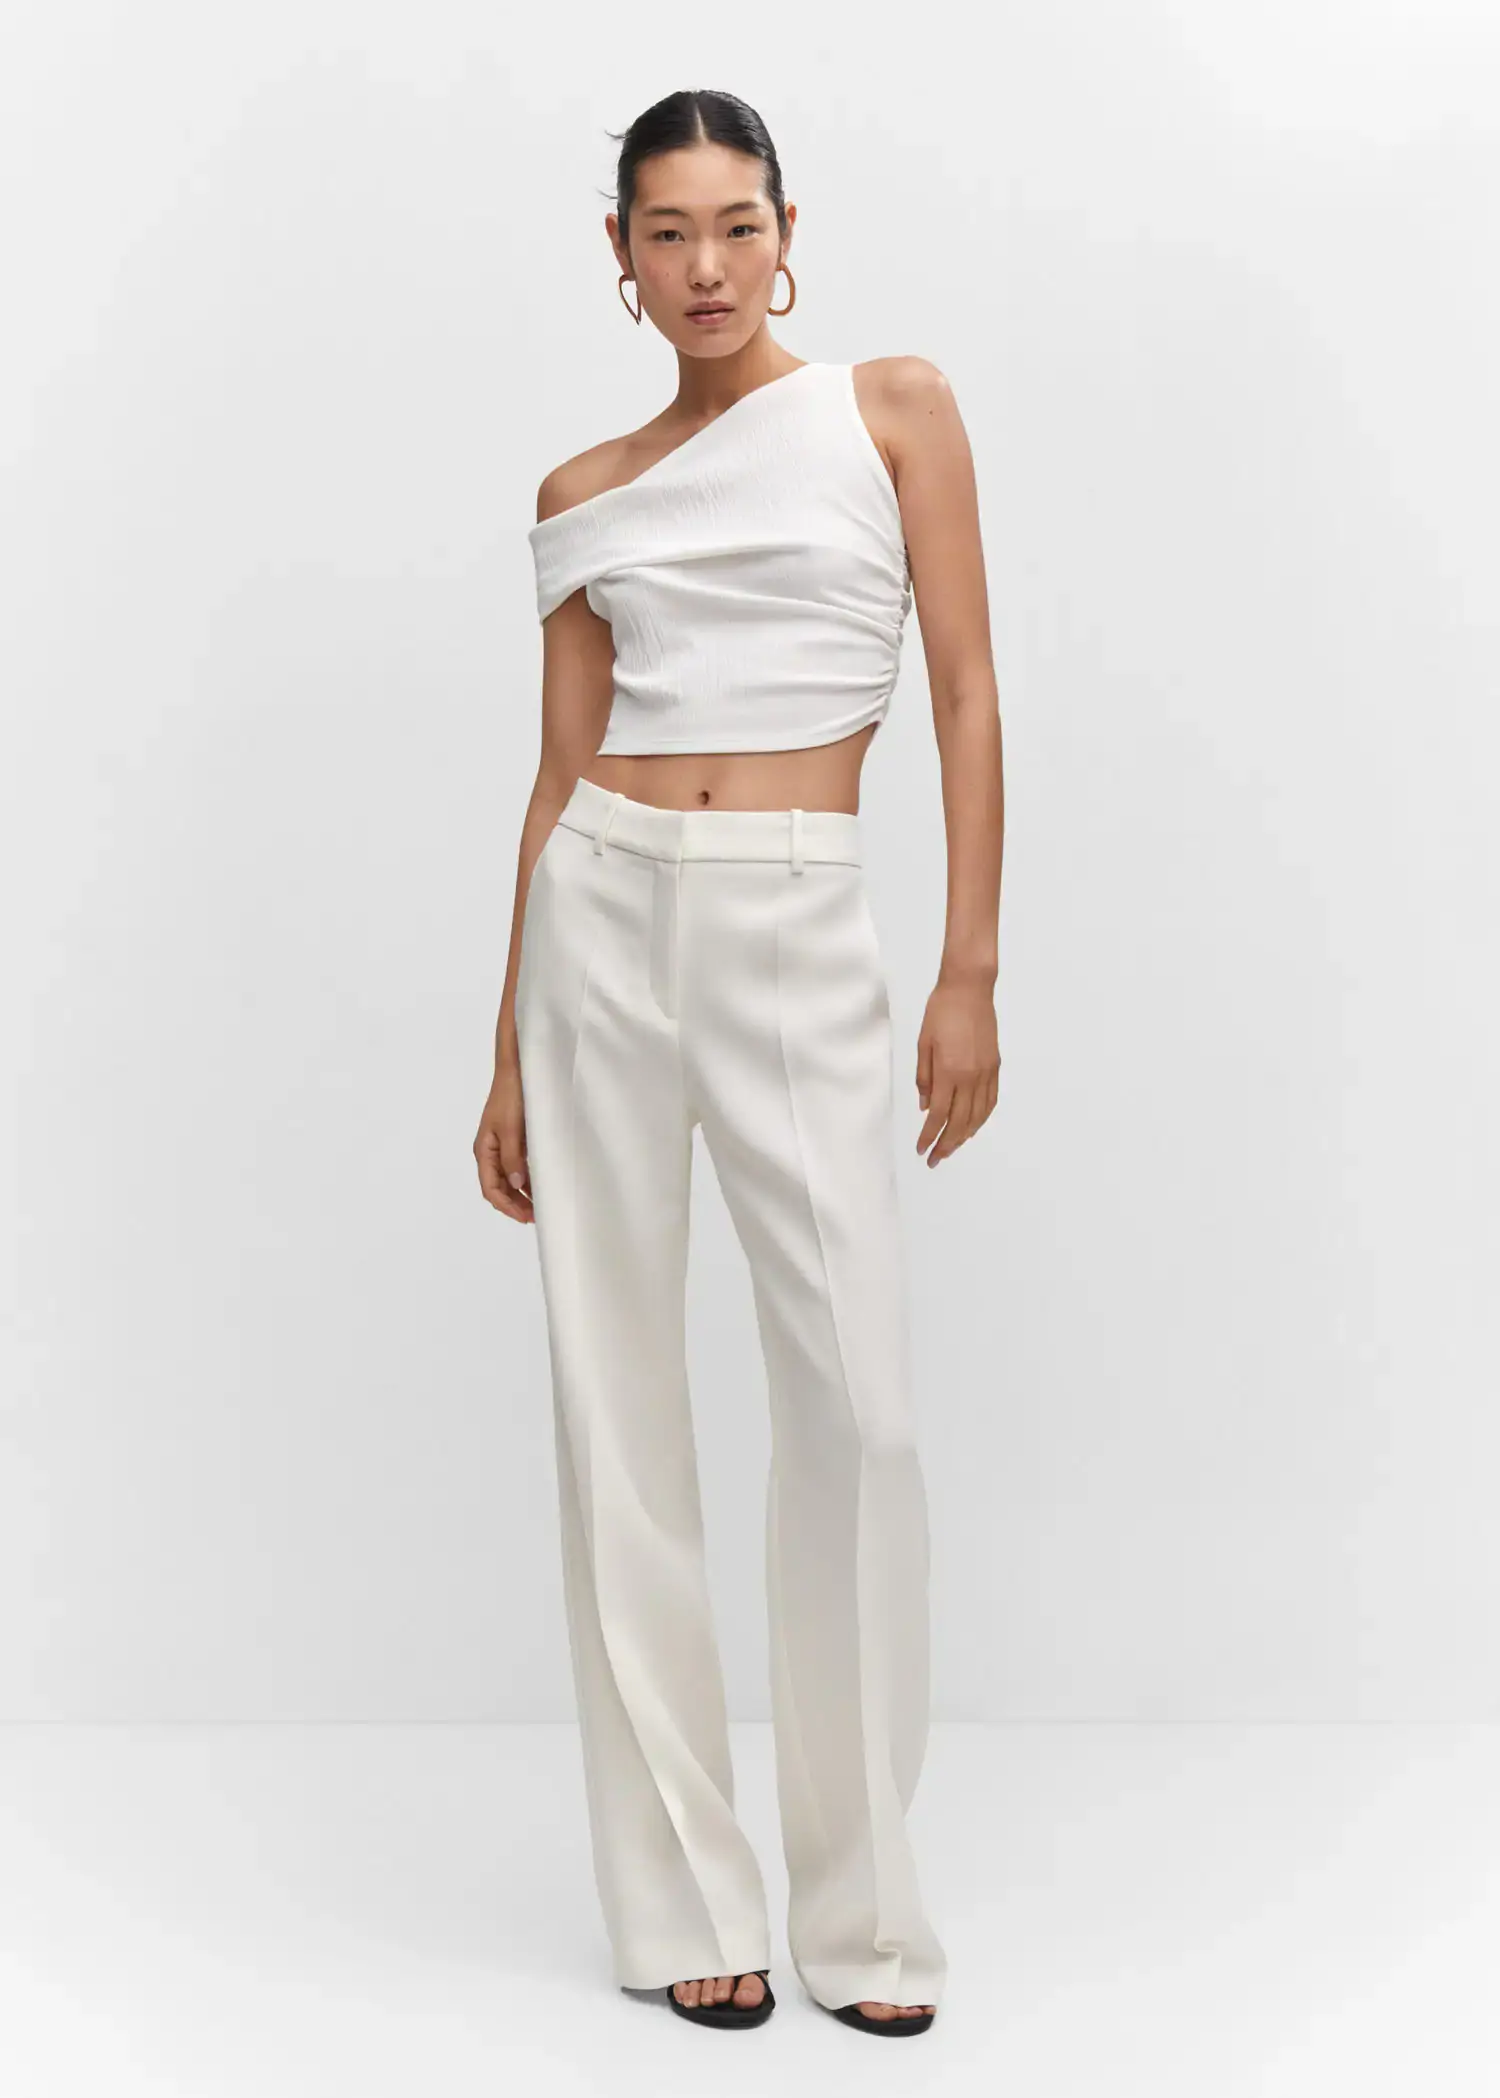 Mango Asymmetrical textured top. a woman in a white outfit standing in front of a white wall. 